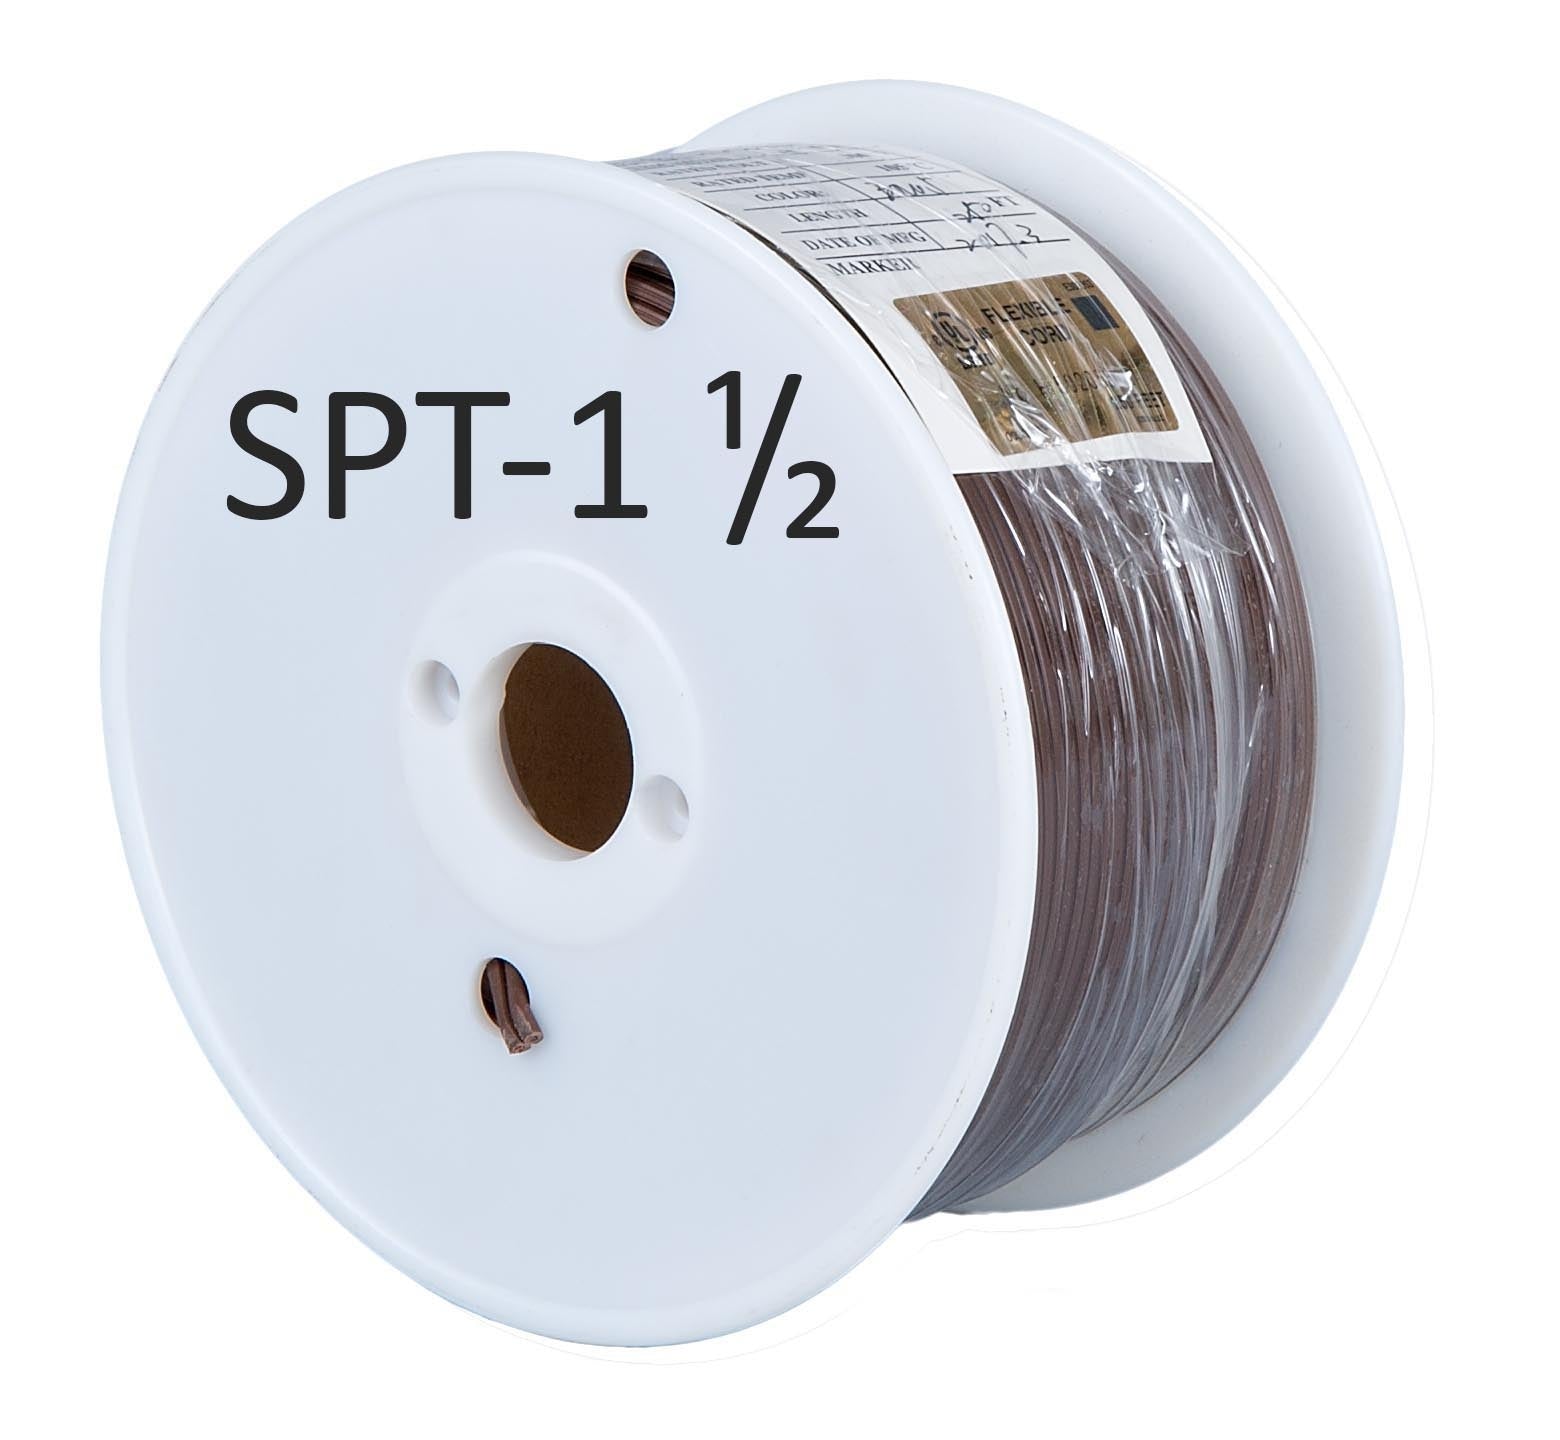 250 Ft. Spool, 18/2, SPT-1 1/2 General Purpose, Plastic Covered Lamp Cord - Wire, 105 degree C, 300V - CHOICE of 5 COLORS